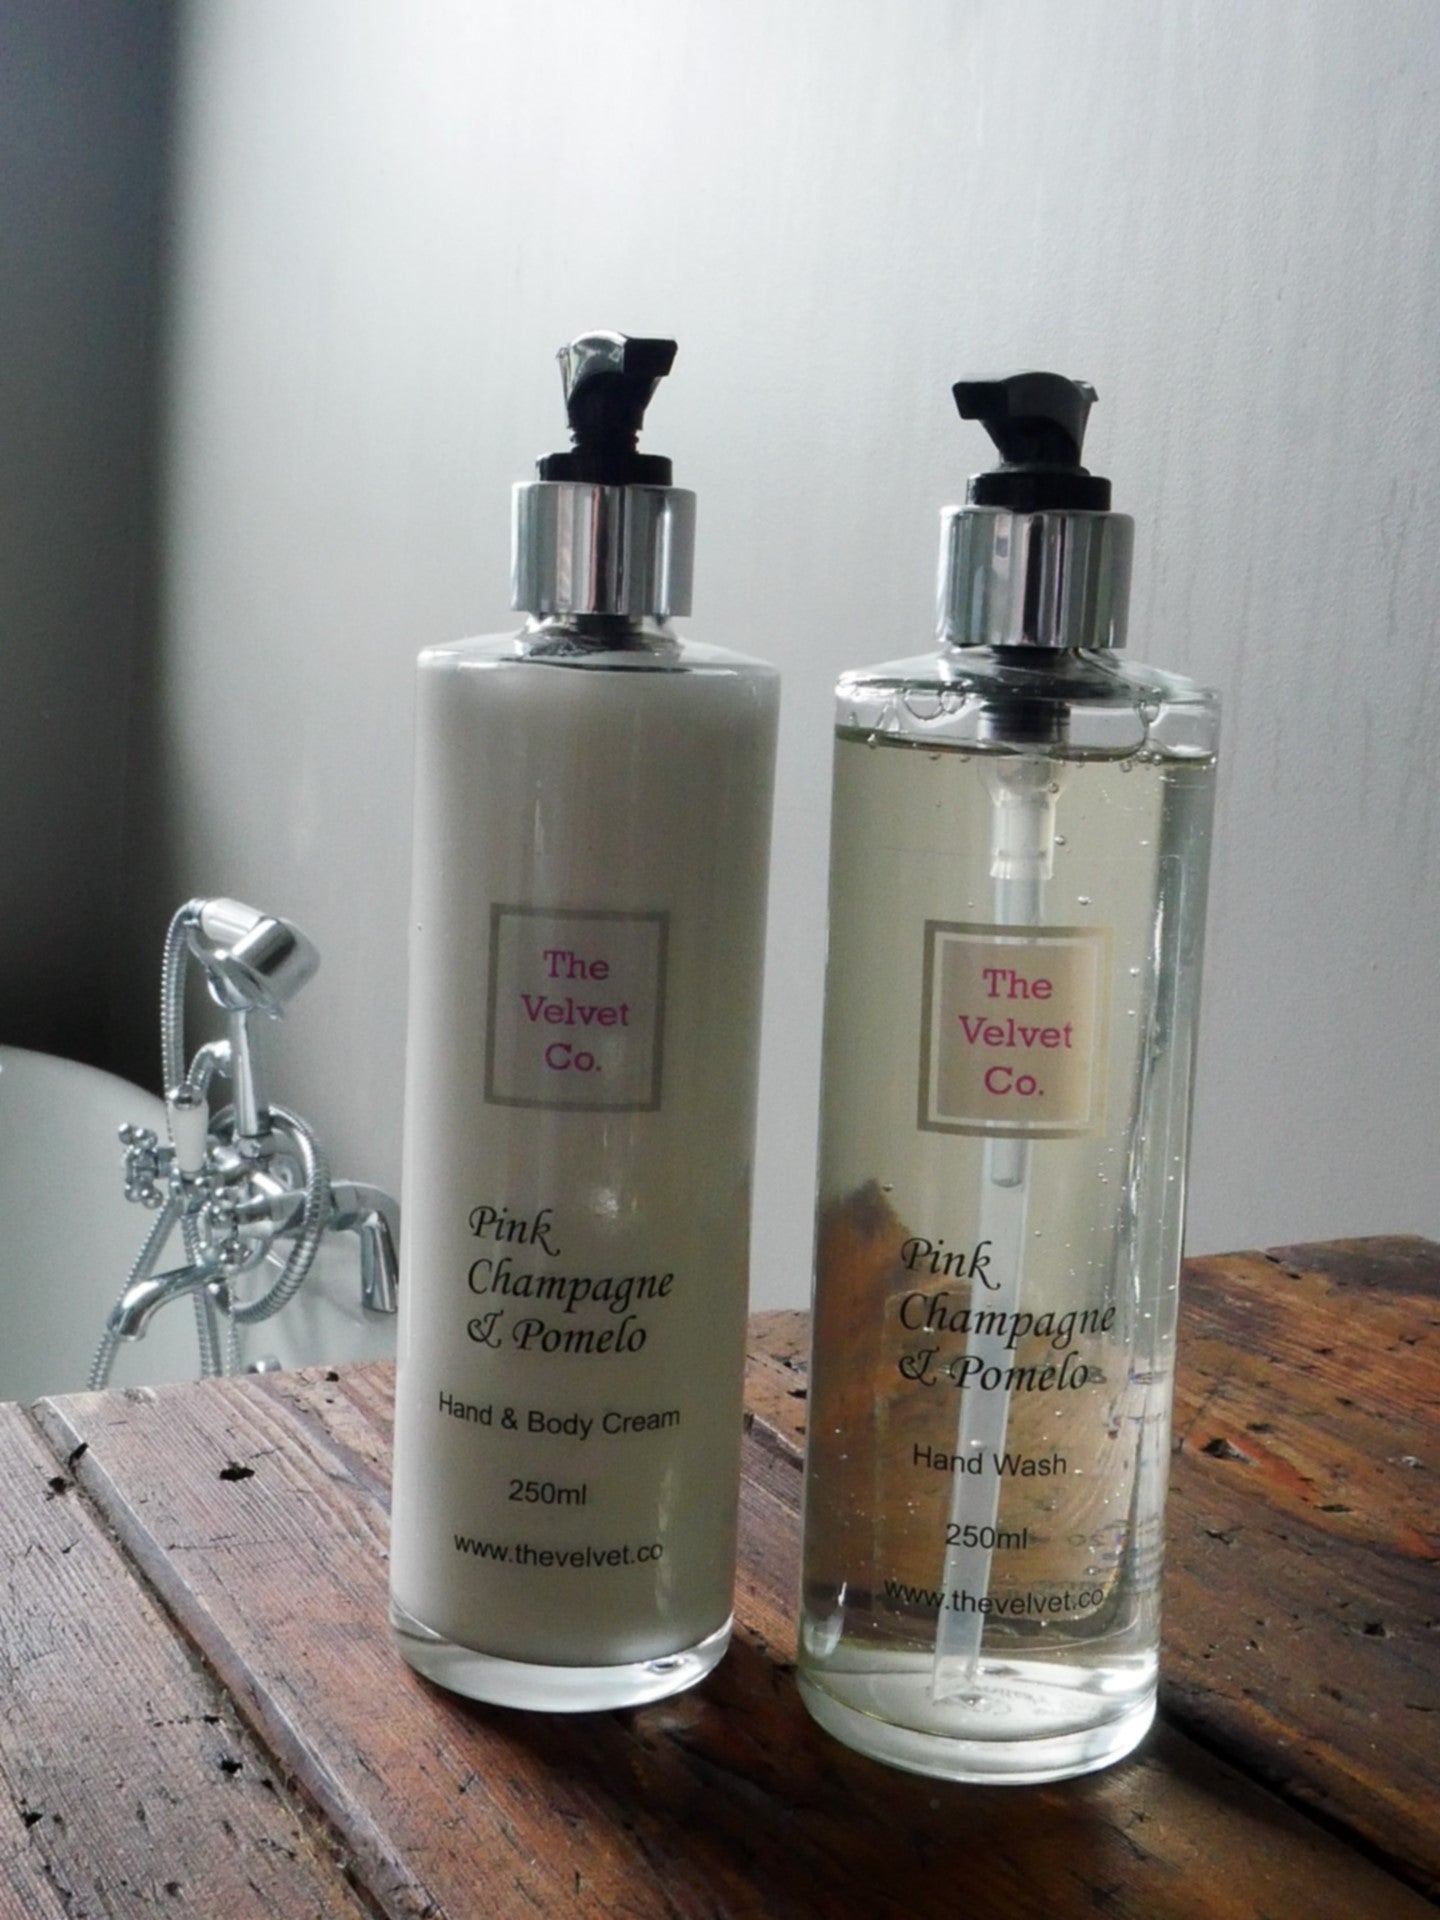 Pink Champagne & Pomelo Hand Wash